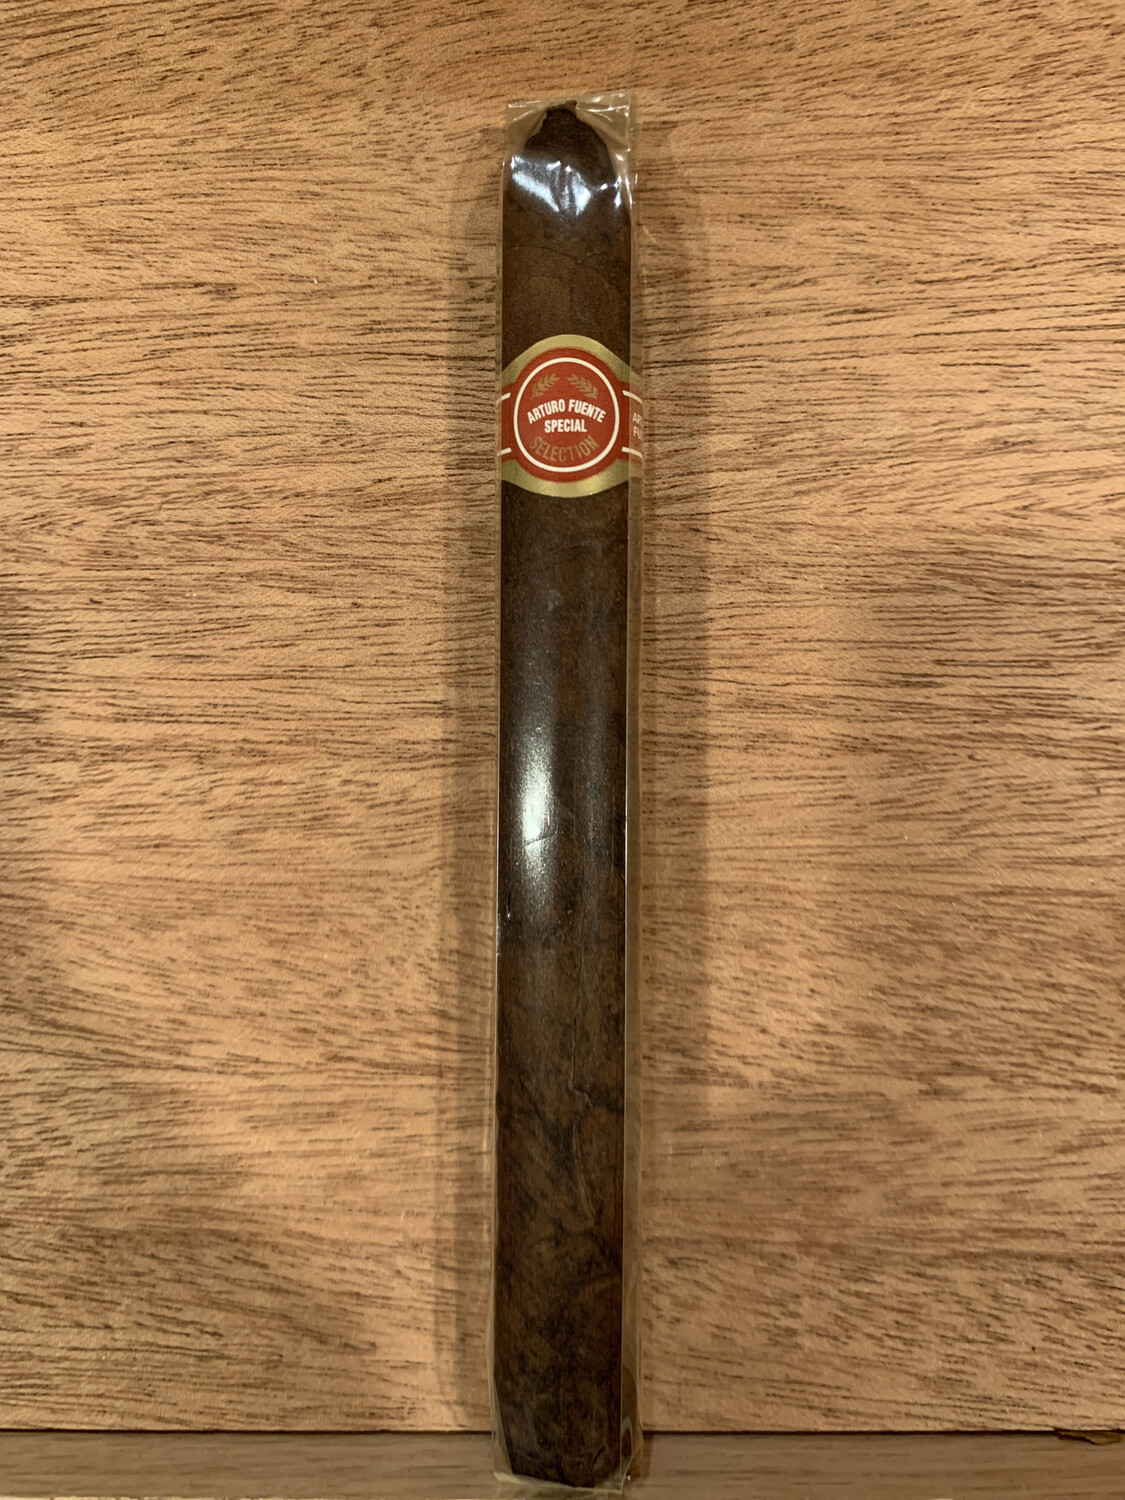 AF Curly Head Deluxe Maduro